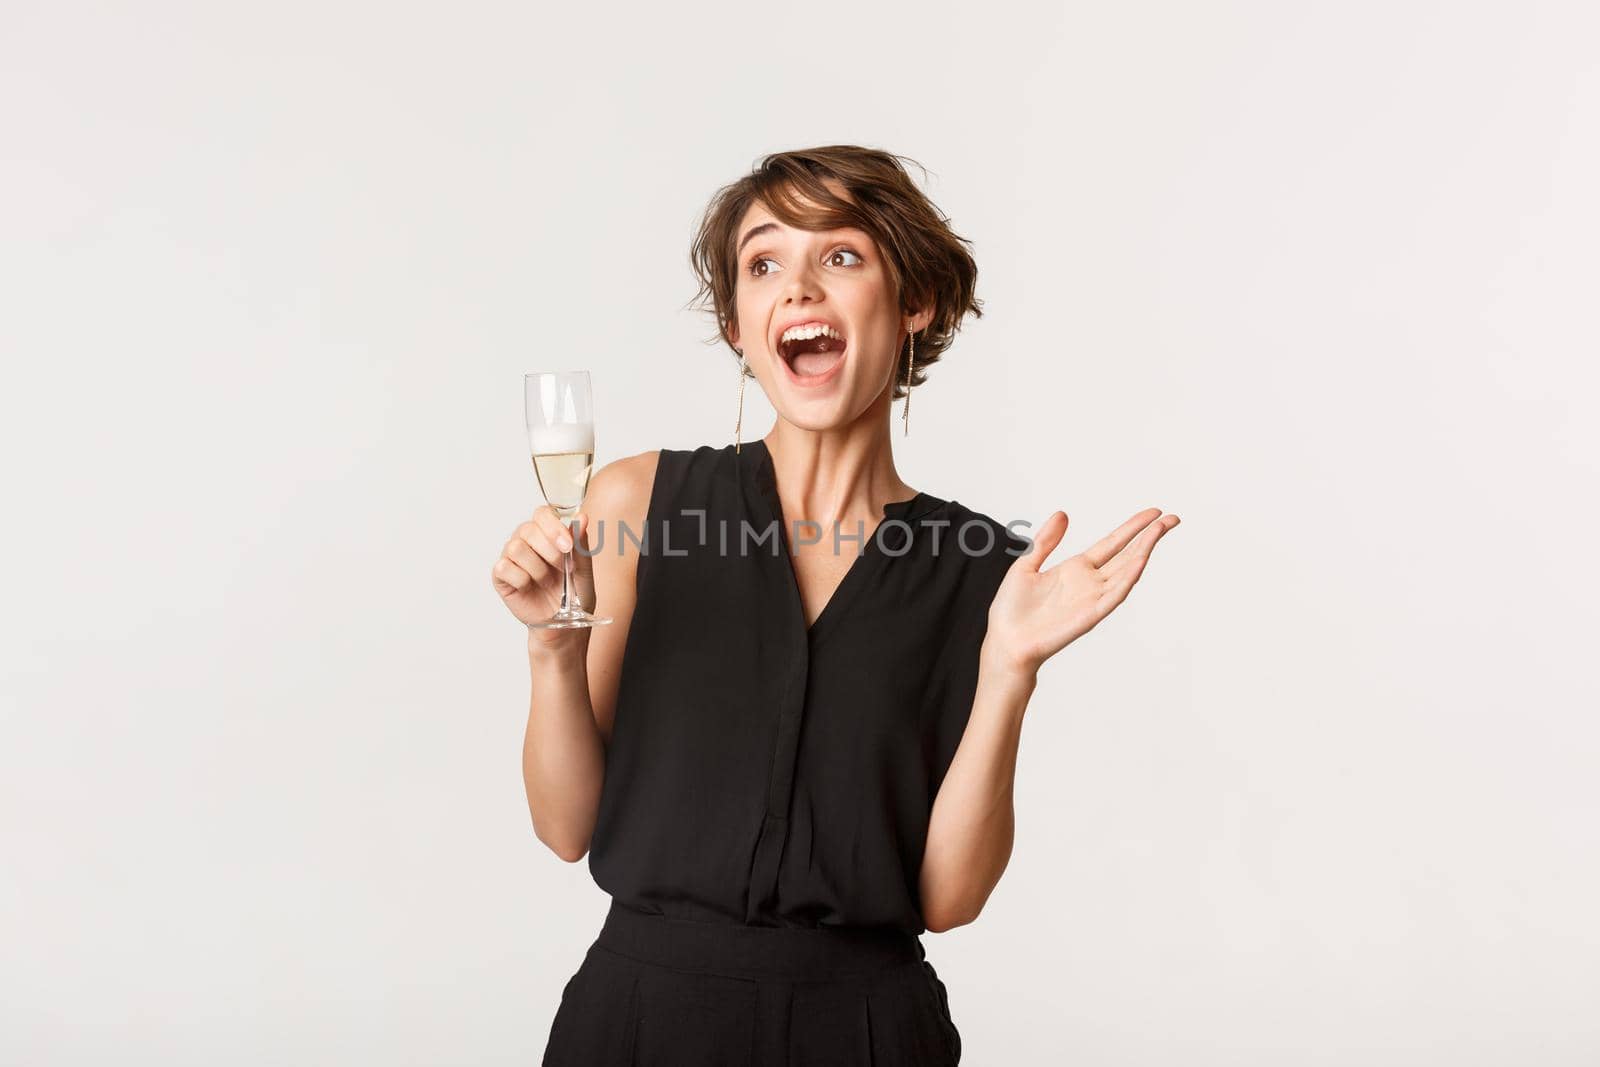 Excited party girl looking joyful upper left corner, holding glass of champagne, standing over white background.